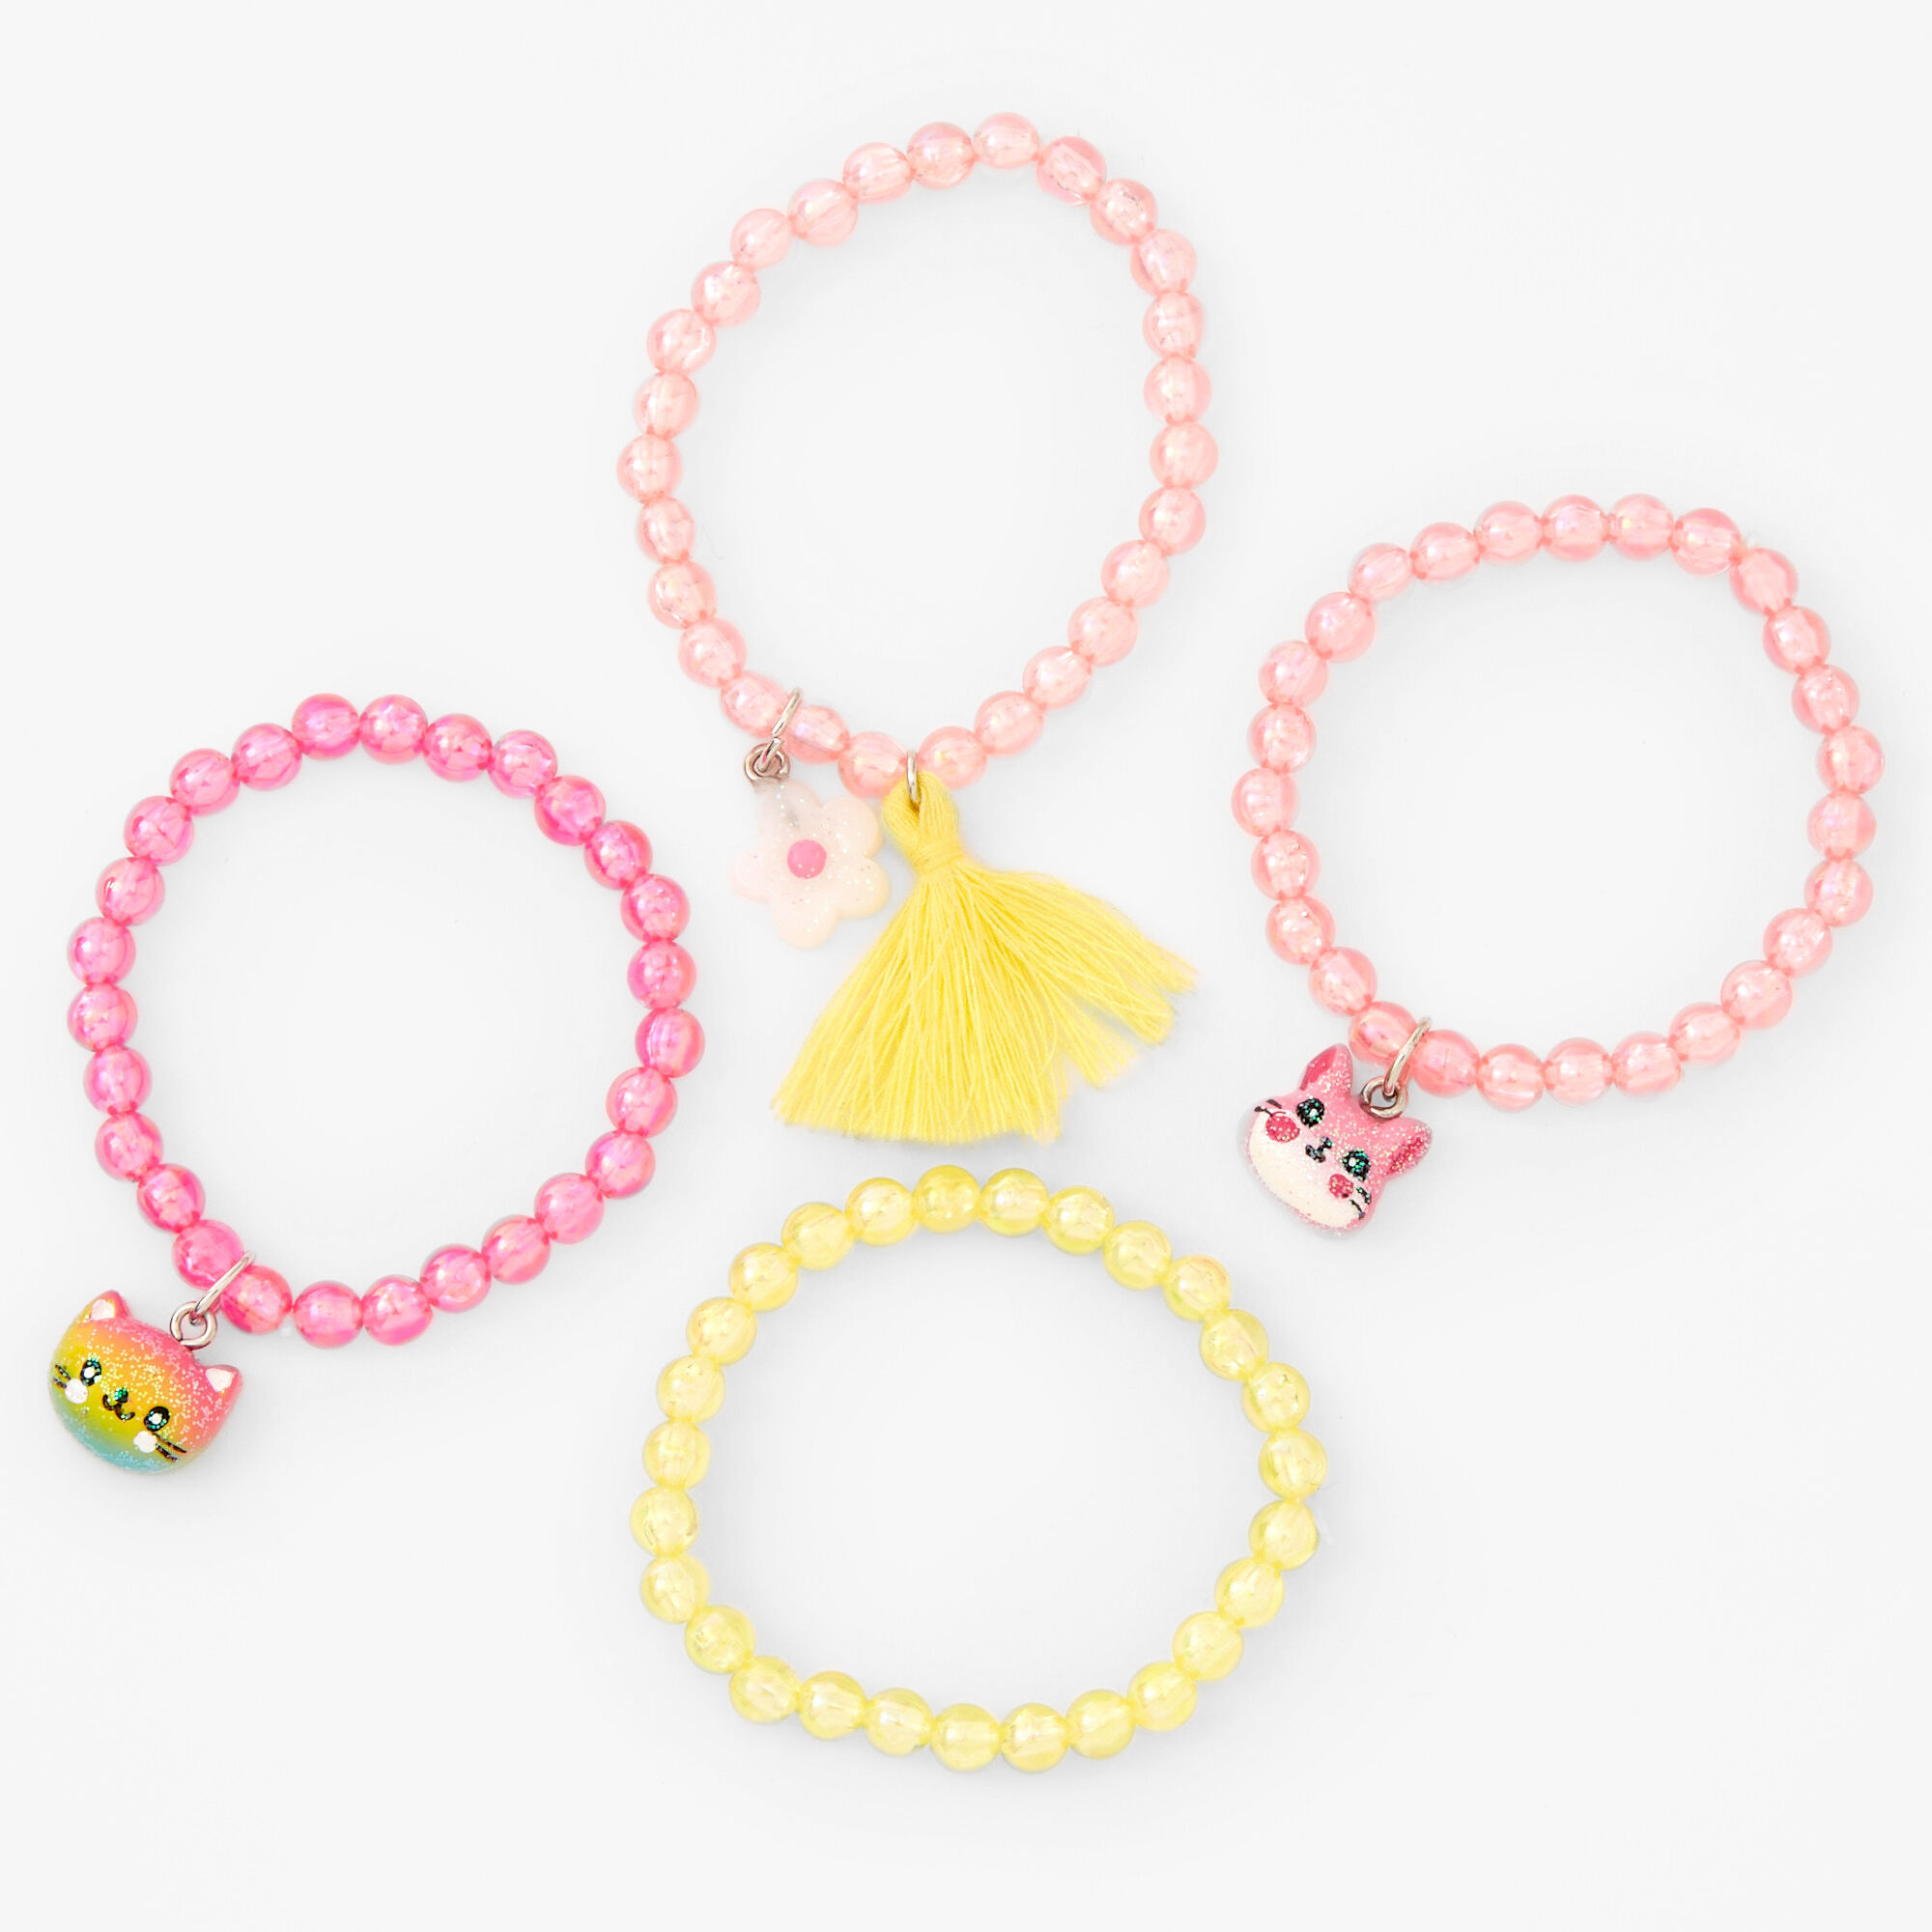 Claire's Pink Charm Chain Bracelet | Hawthorn Mall